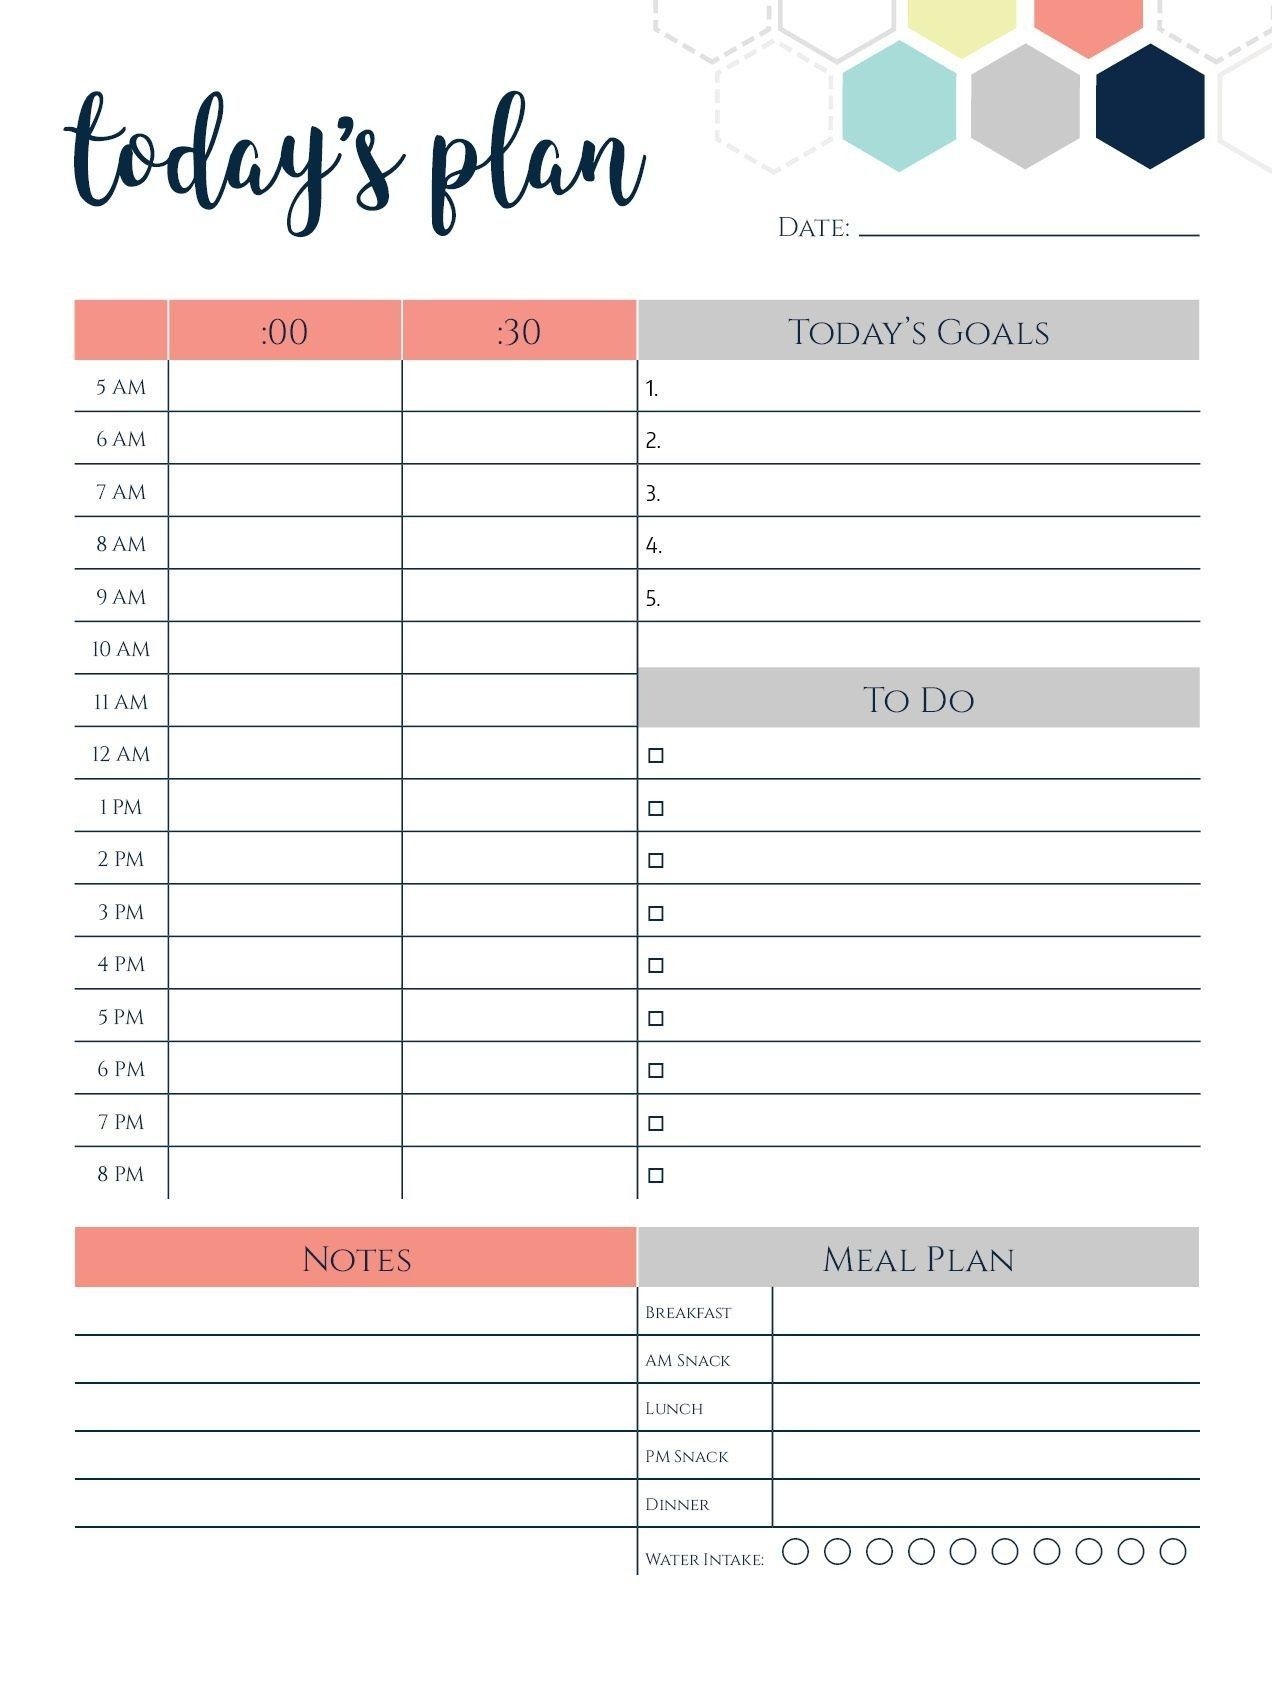 Free Daily Schedule 30 Minute Increments Example Calendar Printable